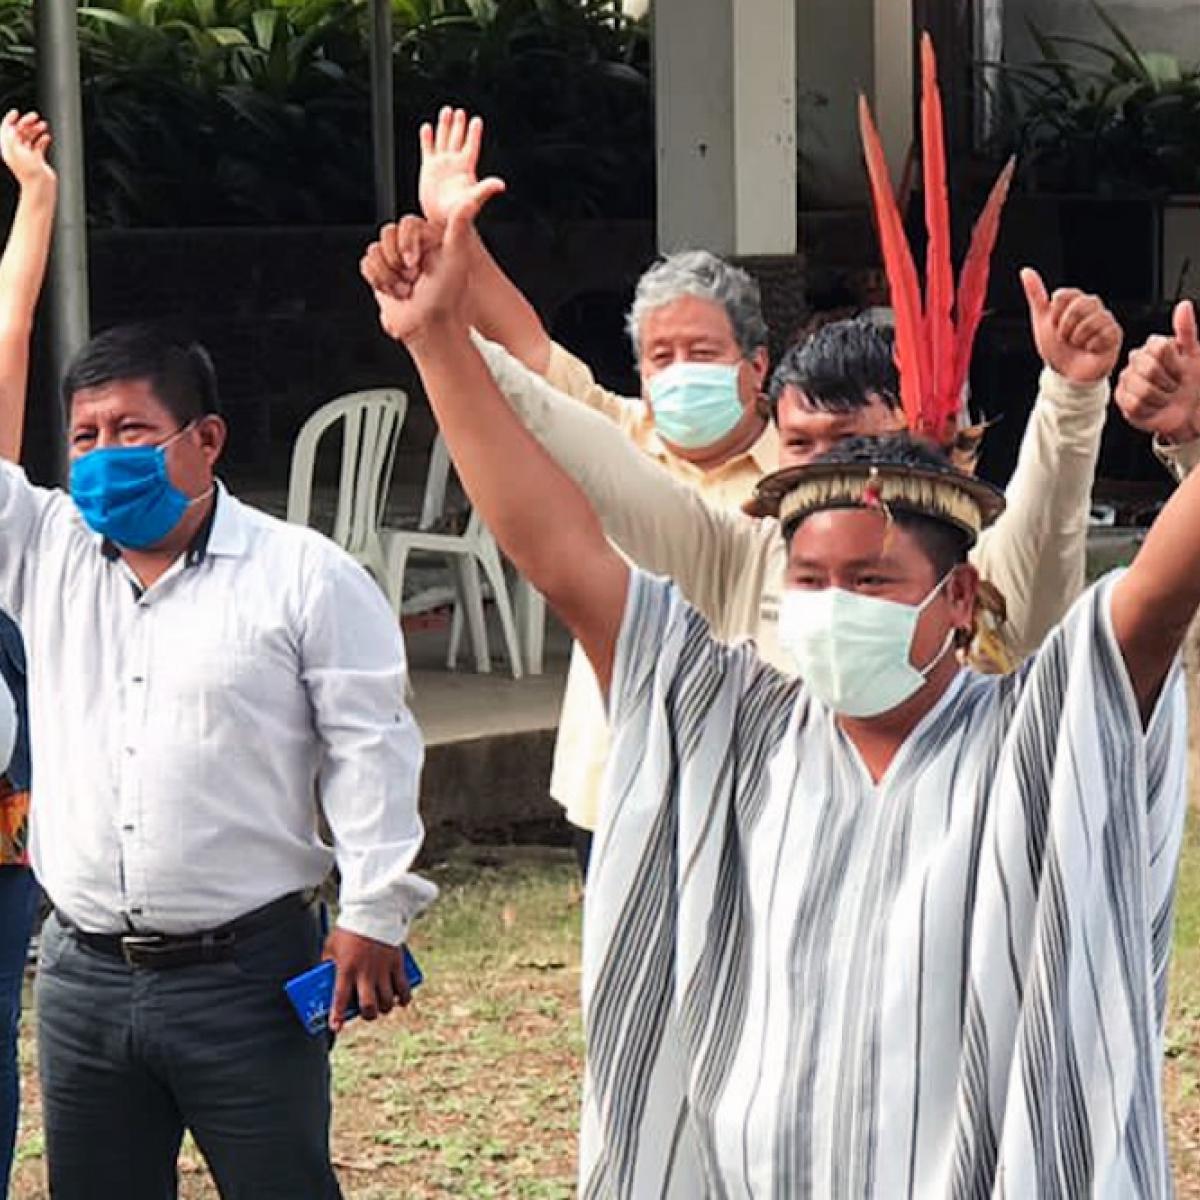 Members of Amazonian Indigenous community in La Convención, Cusco, raising hands and welcoming the Indigenous Task Force.